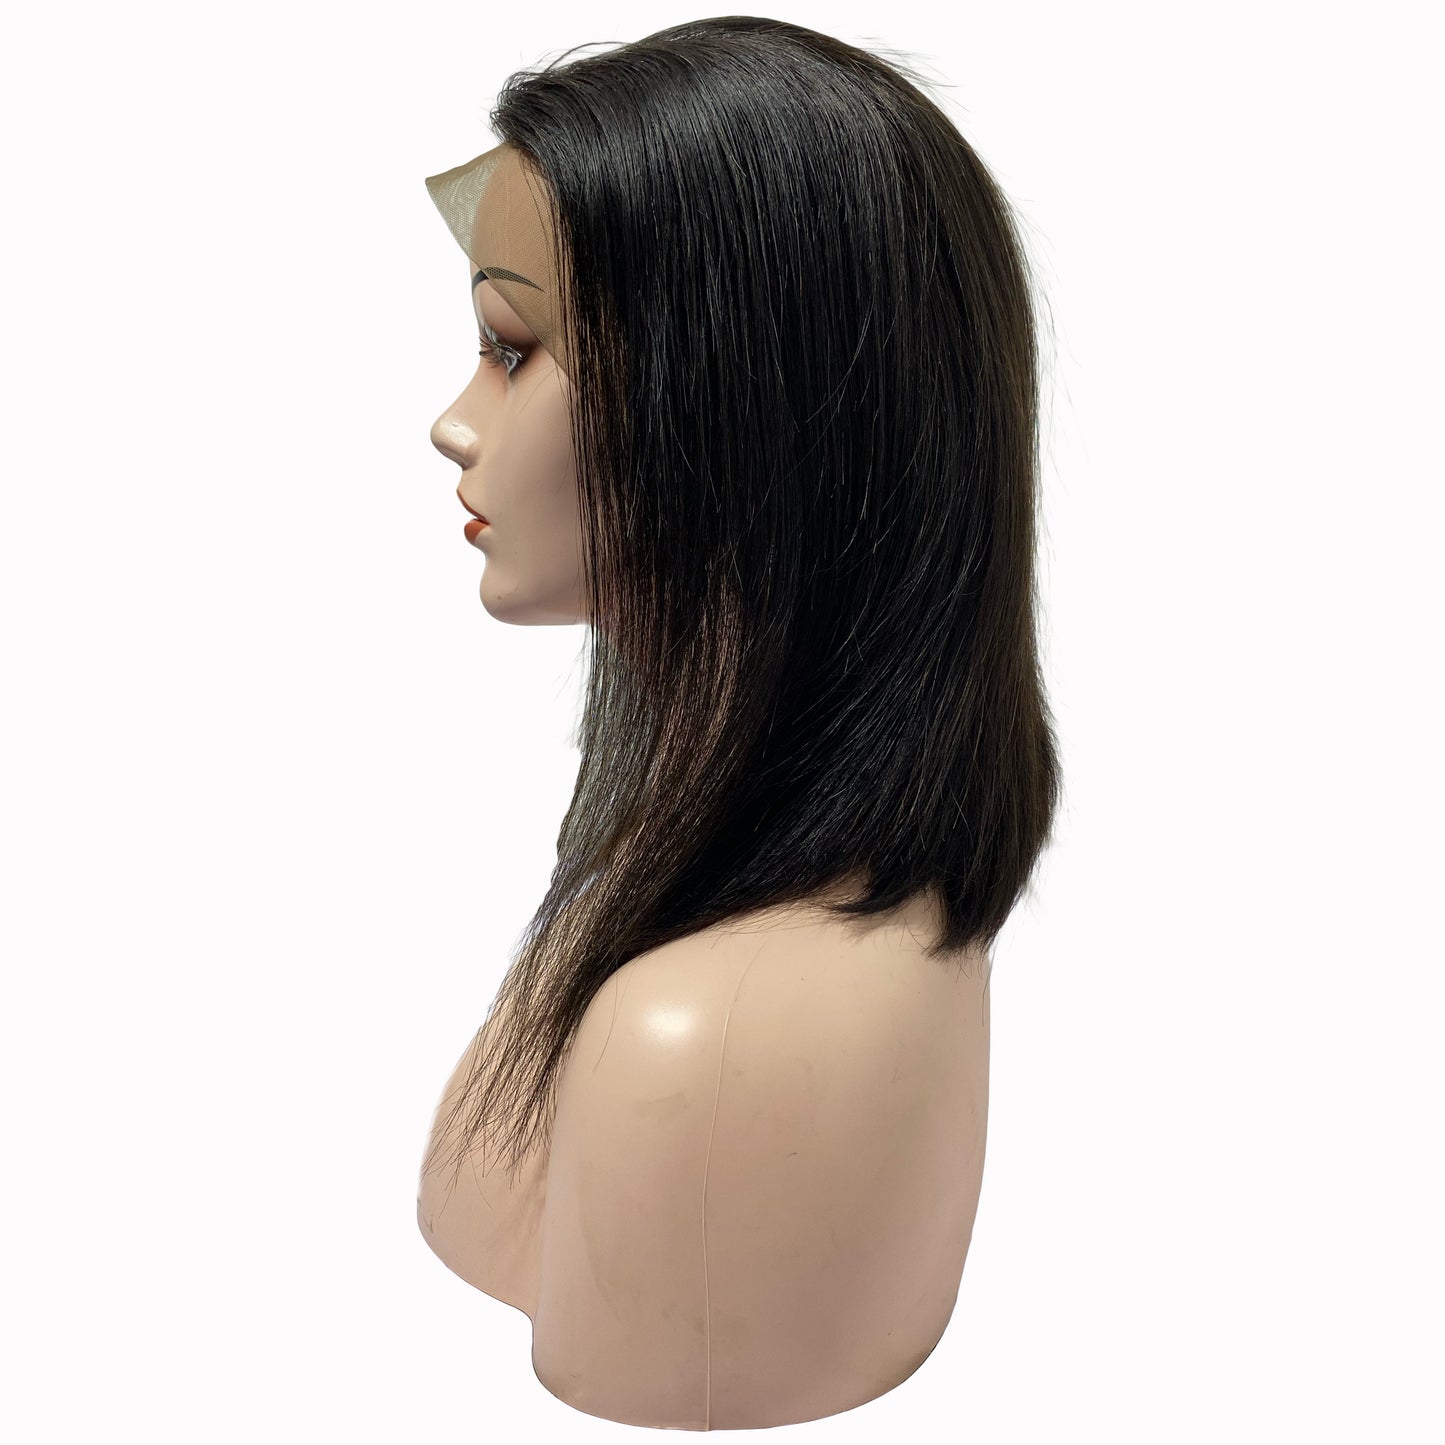 16" Straight Human Hair Frontal Lace Wig - 1# Black - 13A Grade | side